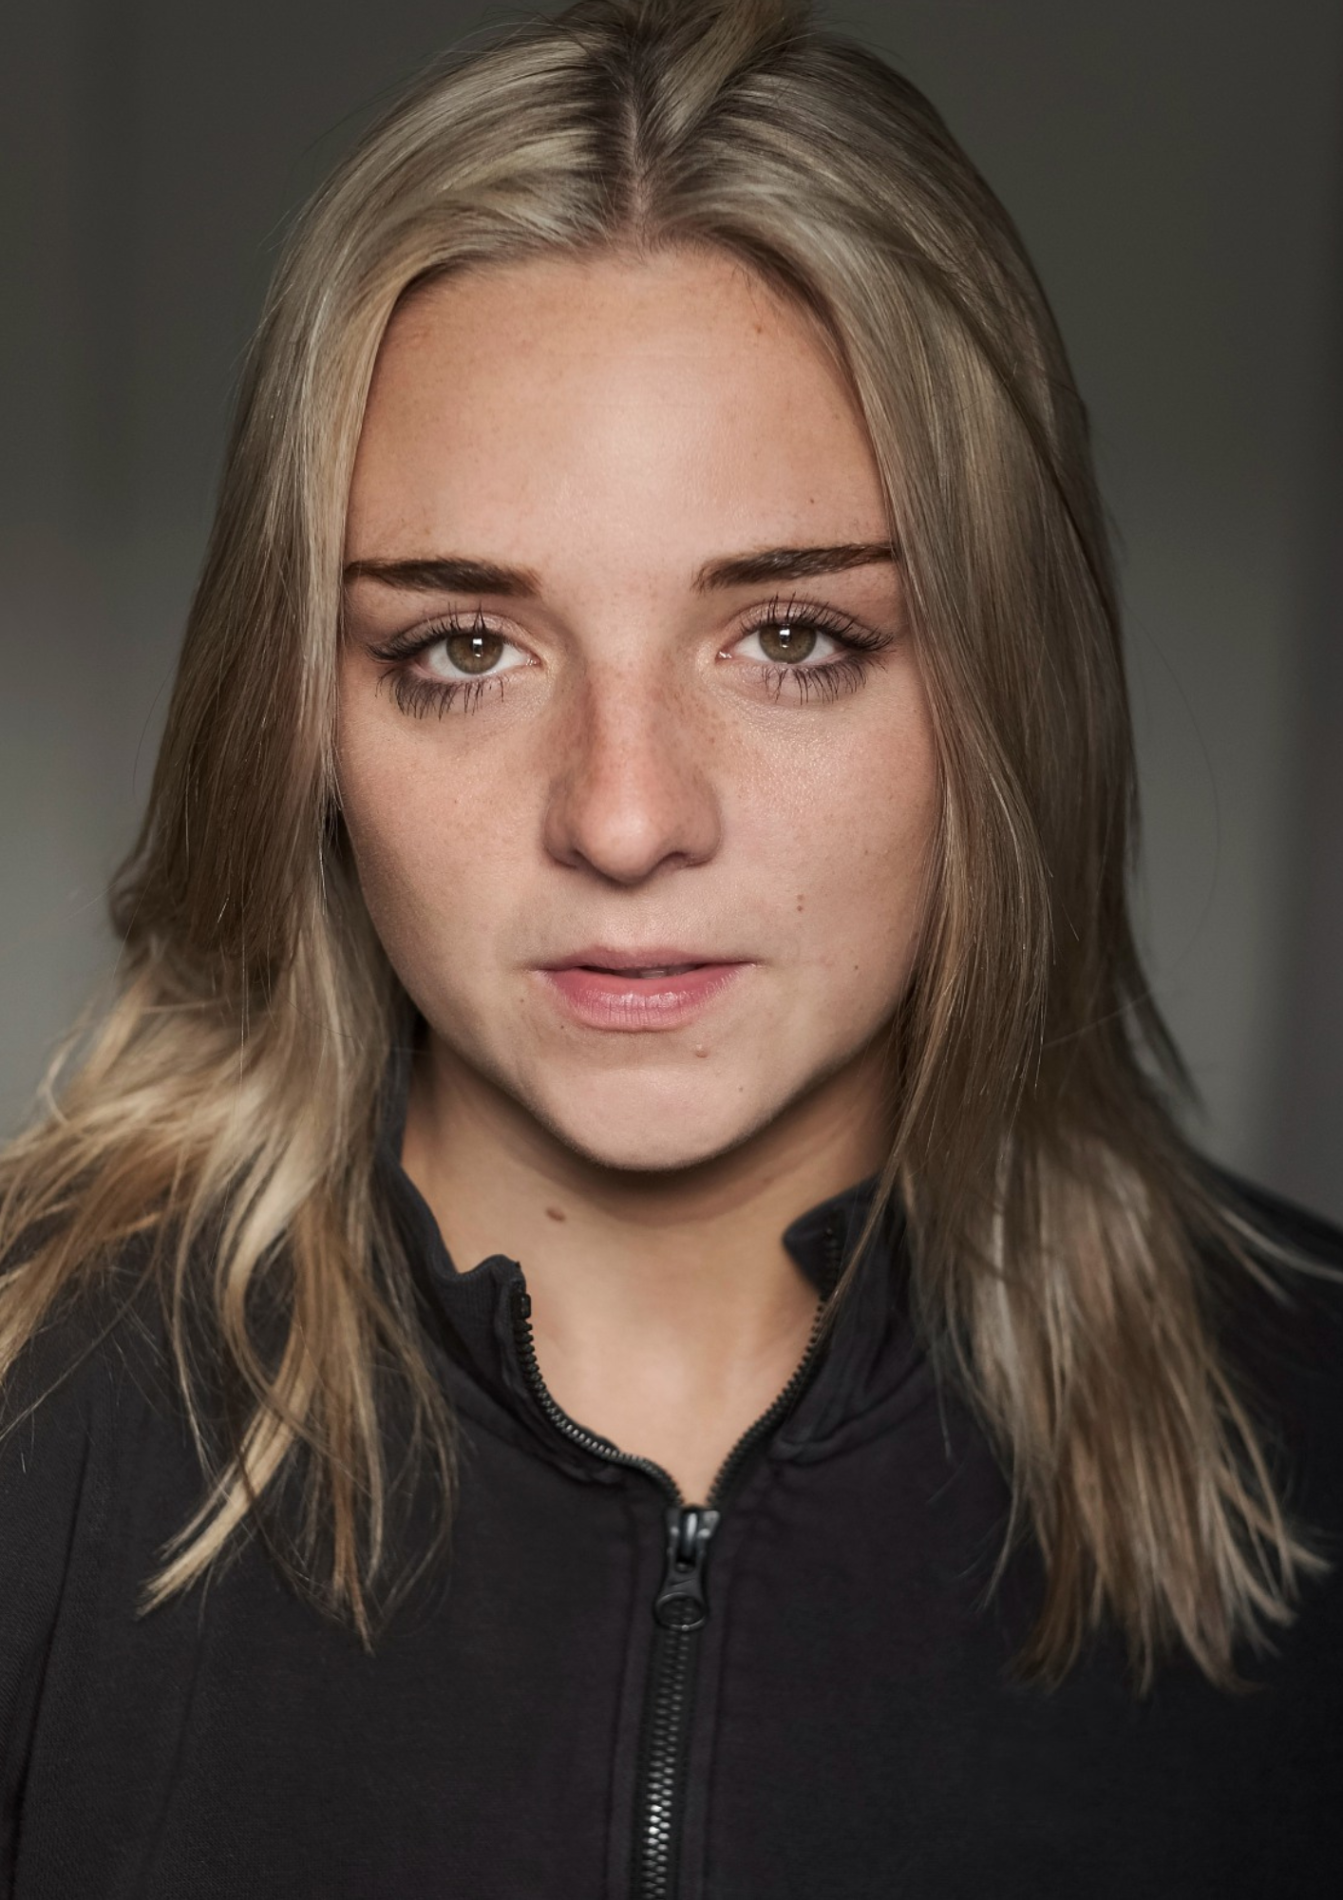 A headshot of a woman. She has long blonde hair and brown eyes. She wears a black zip-up jumper.